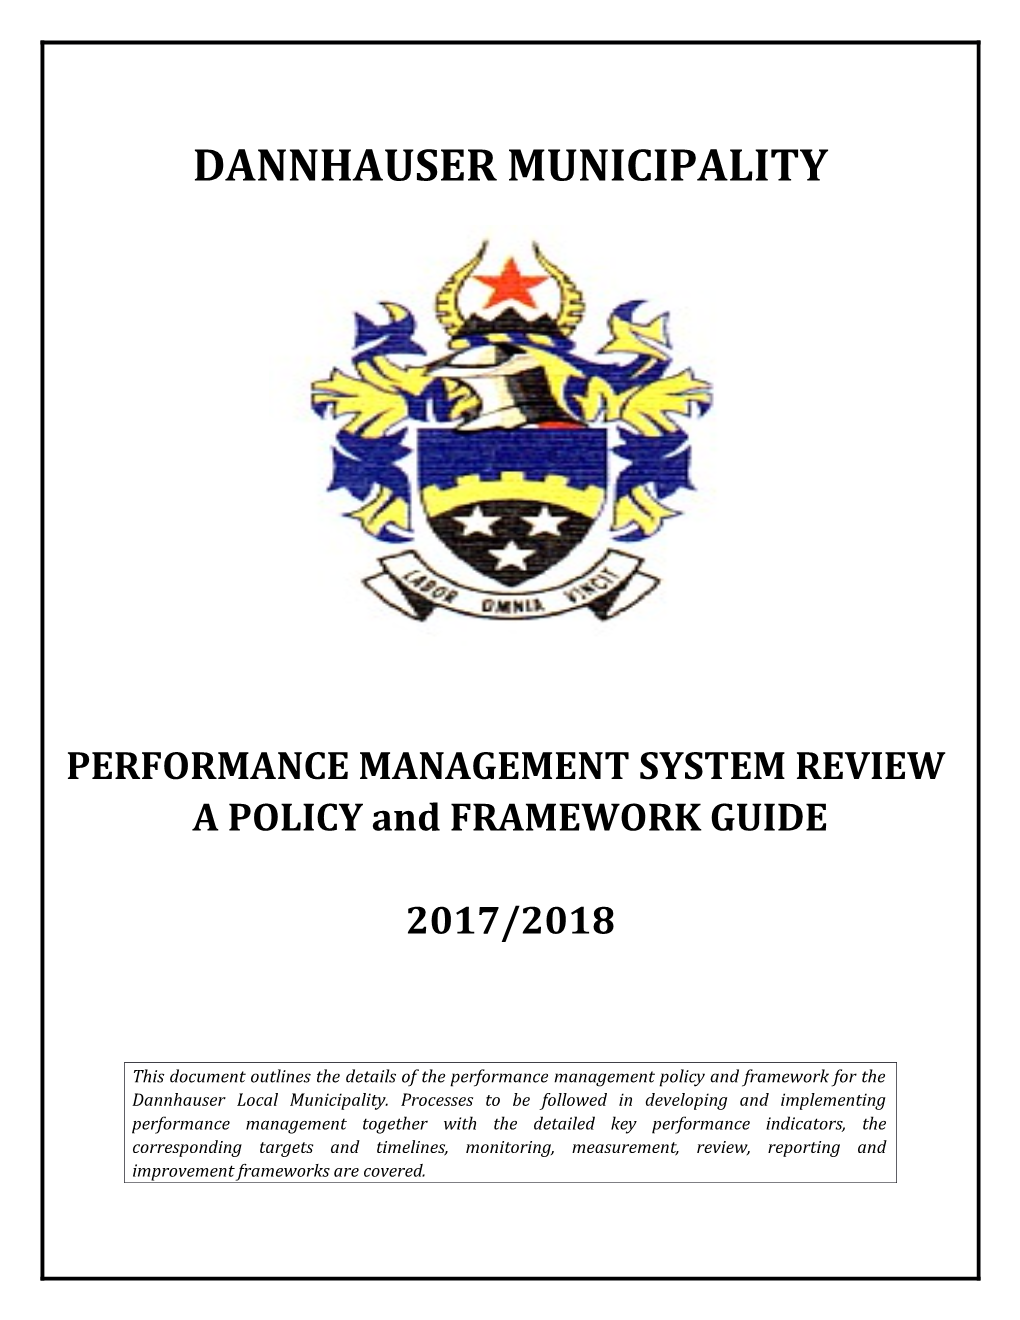 Performance Management System Review